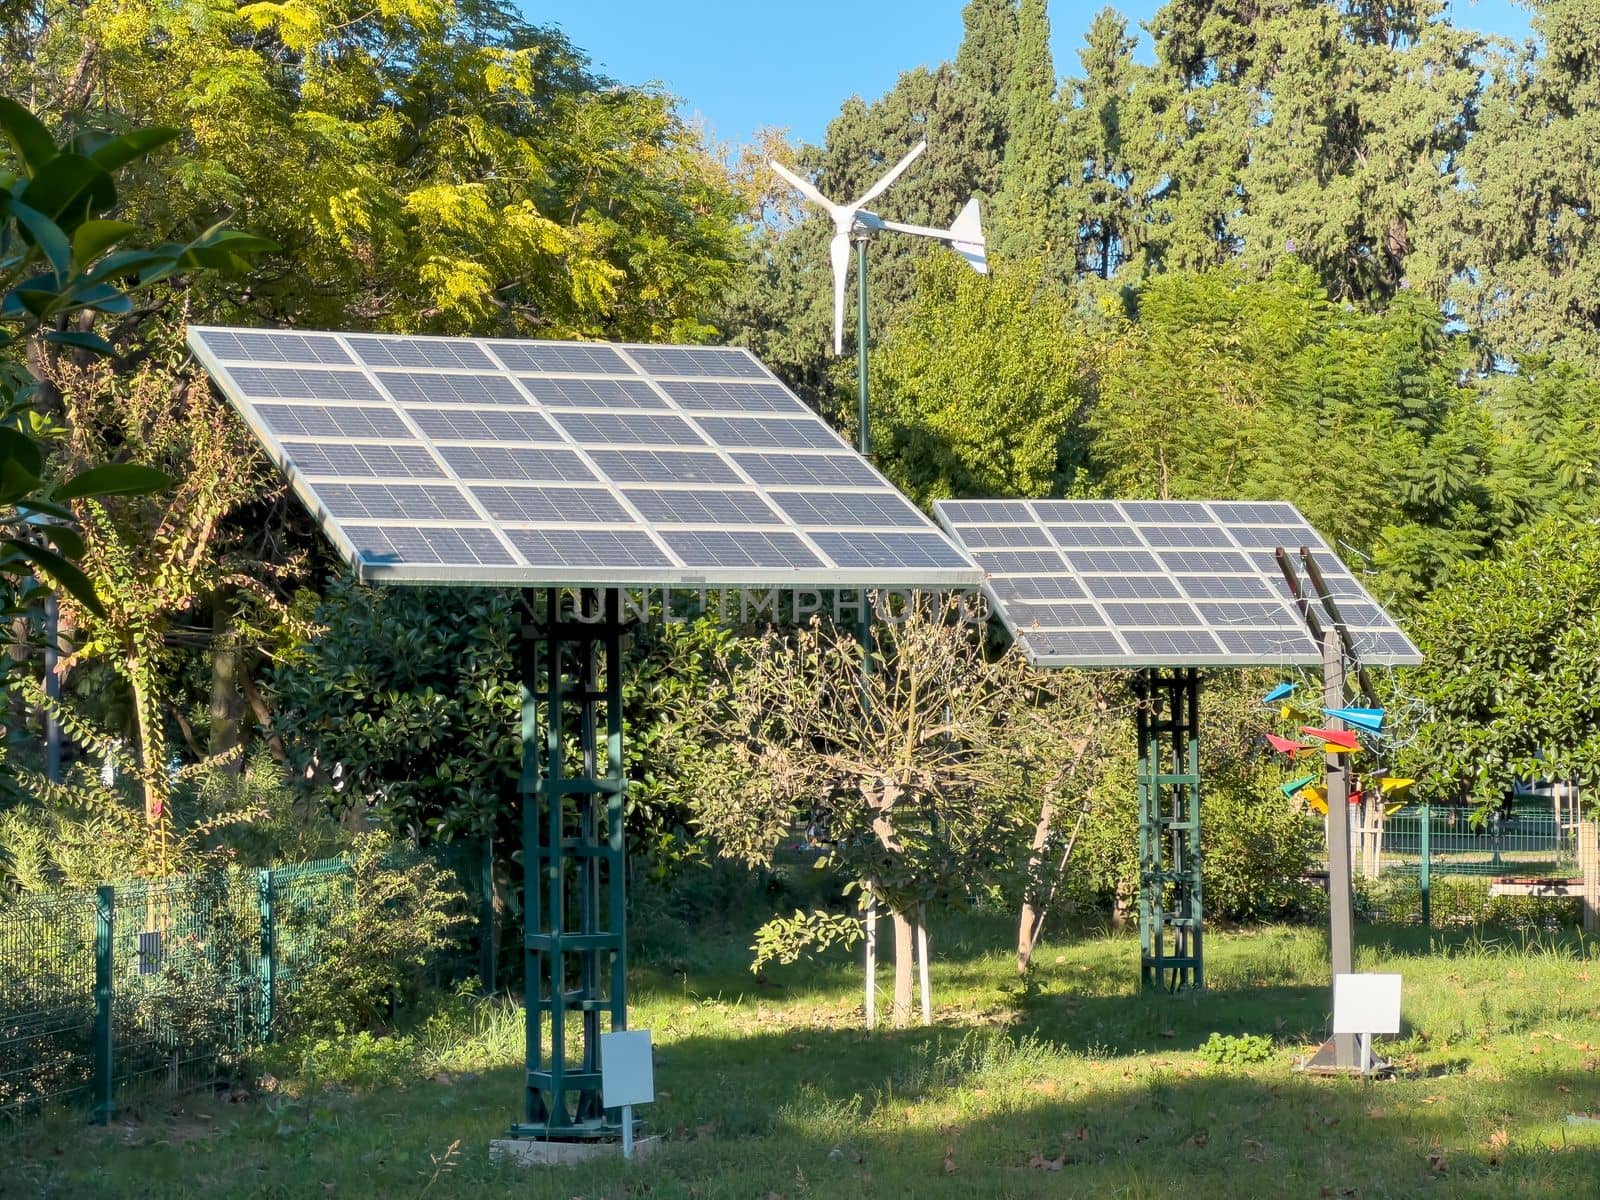 Wind turbine and solar panel installed in the green park area by Sonat